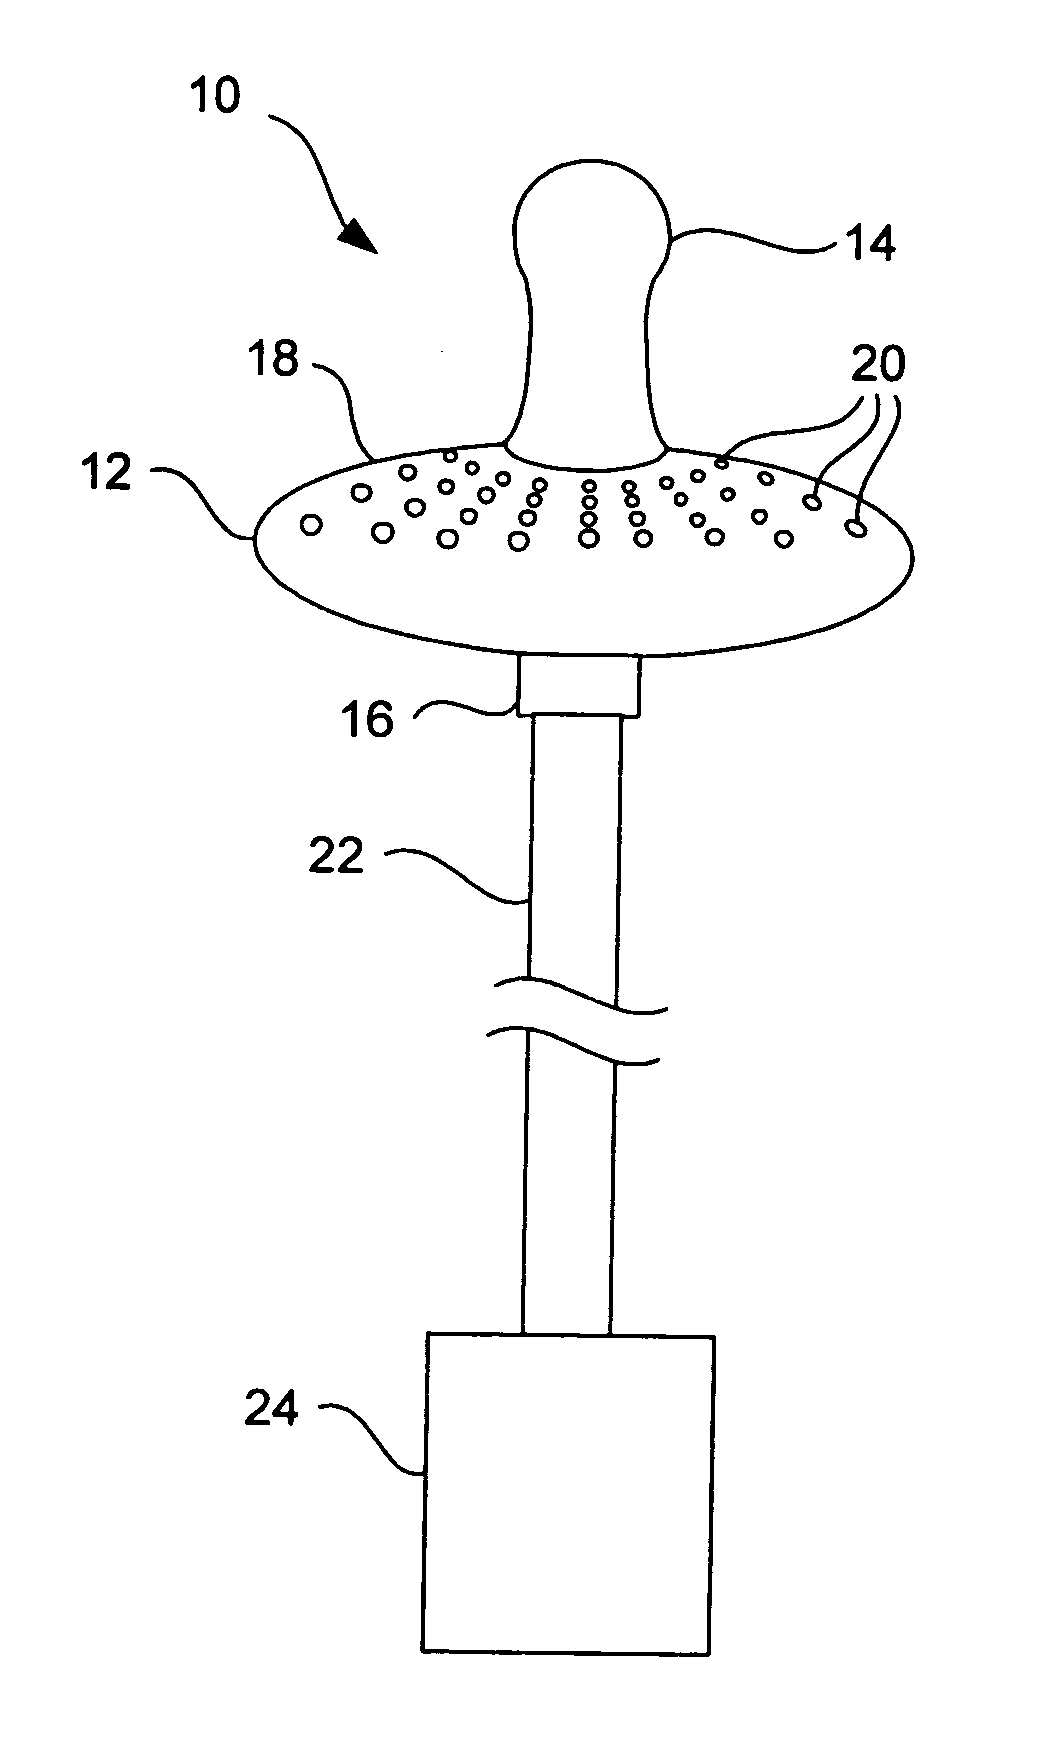 Gas delivery device for infants